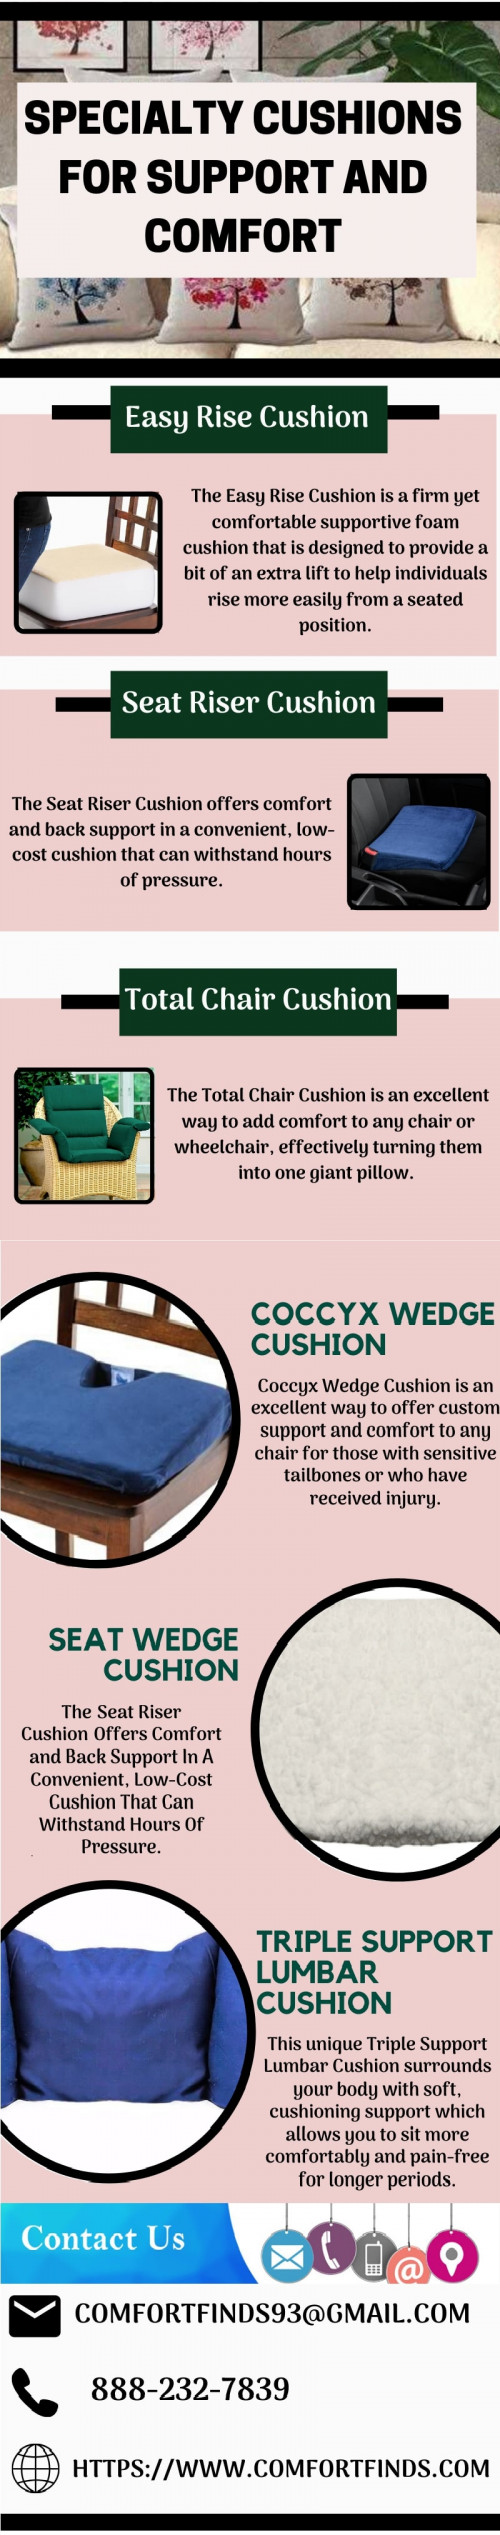 You deserve to be comfortable during your everyday tasks.These cushions are designed to help you or your loved ones feel more comfortable sitting, driving and working. 
https://www.comfortfinds.com/